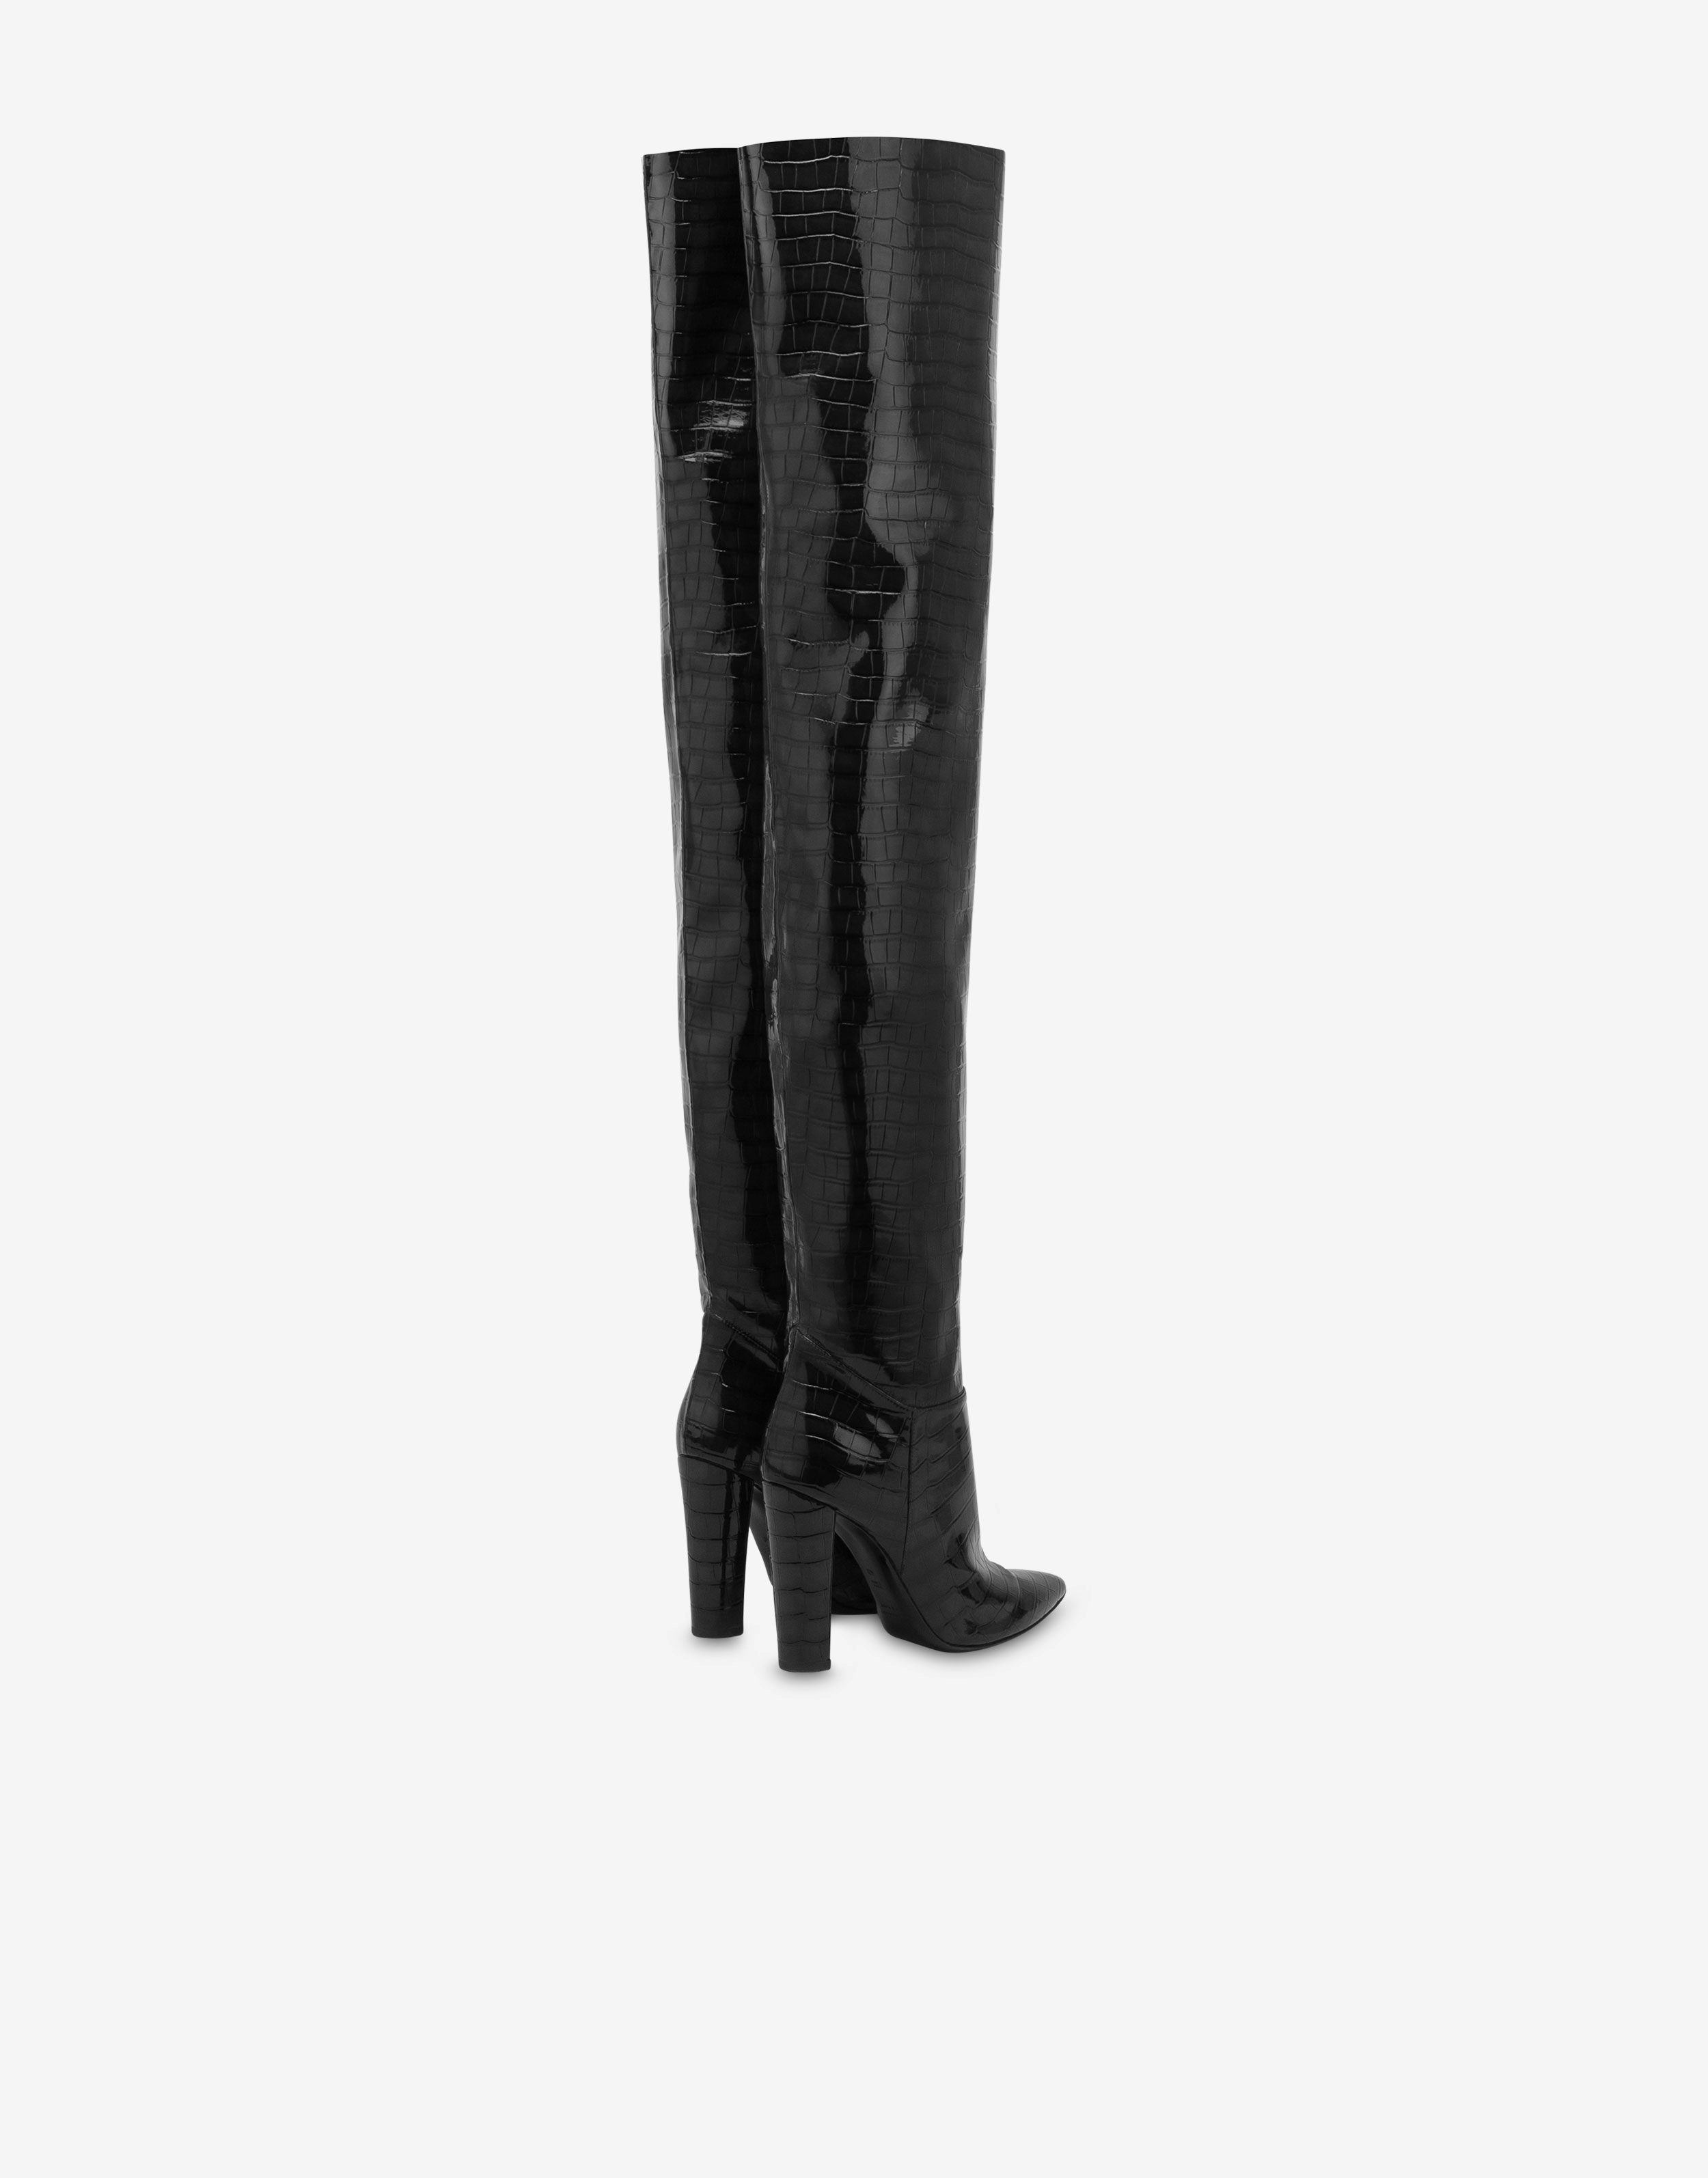 Over-the-knee boots with crocodile print